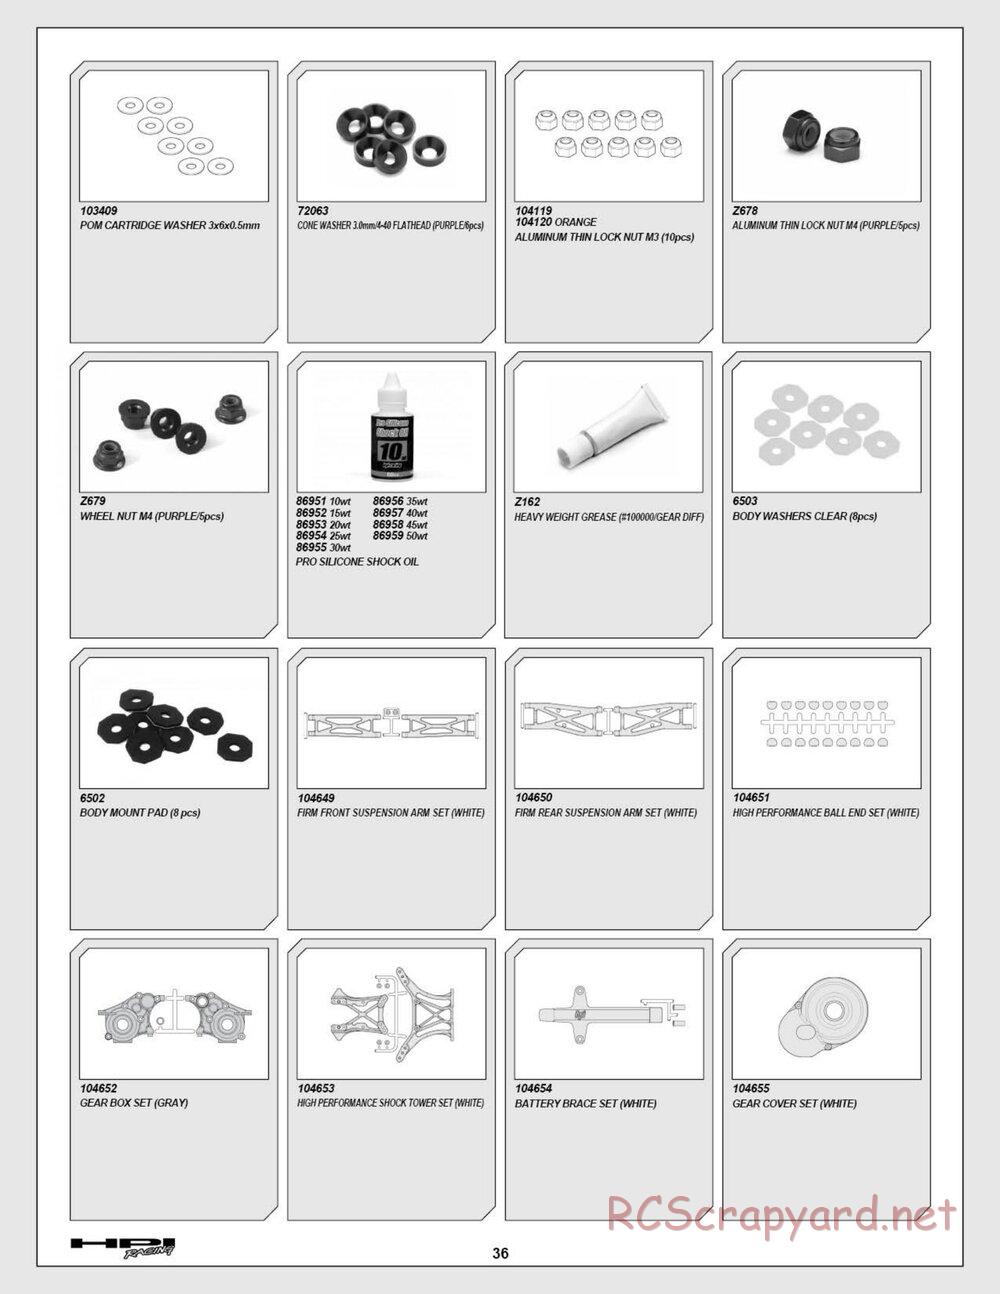 HPI - E-Firestorm 10 HT - Exploded View - Page 36